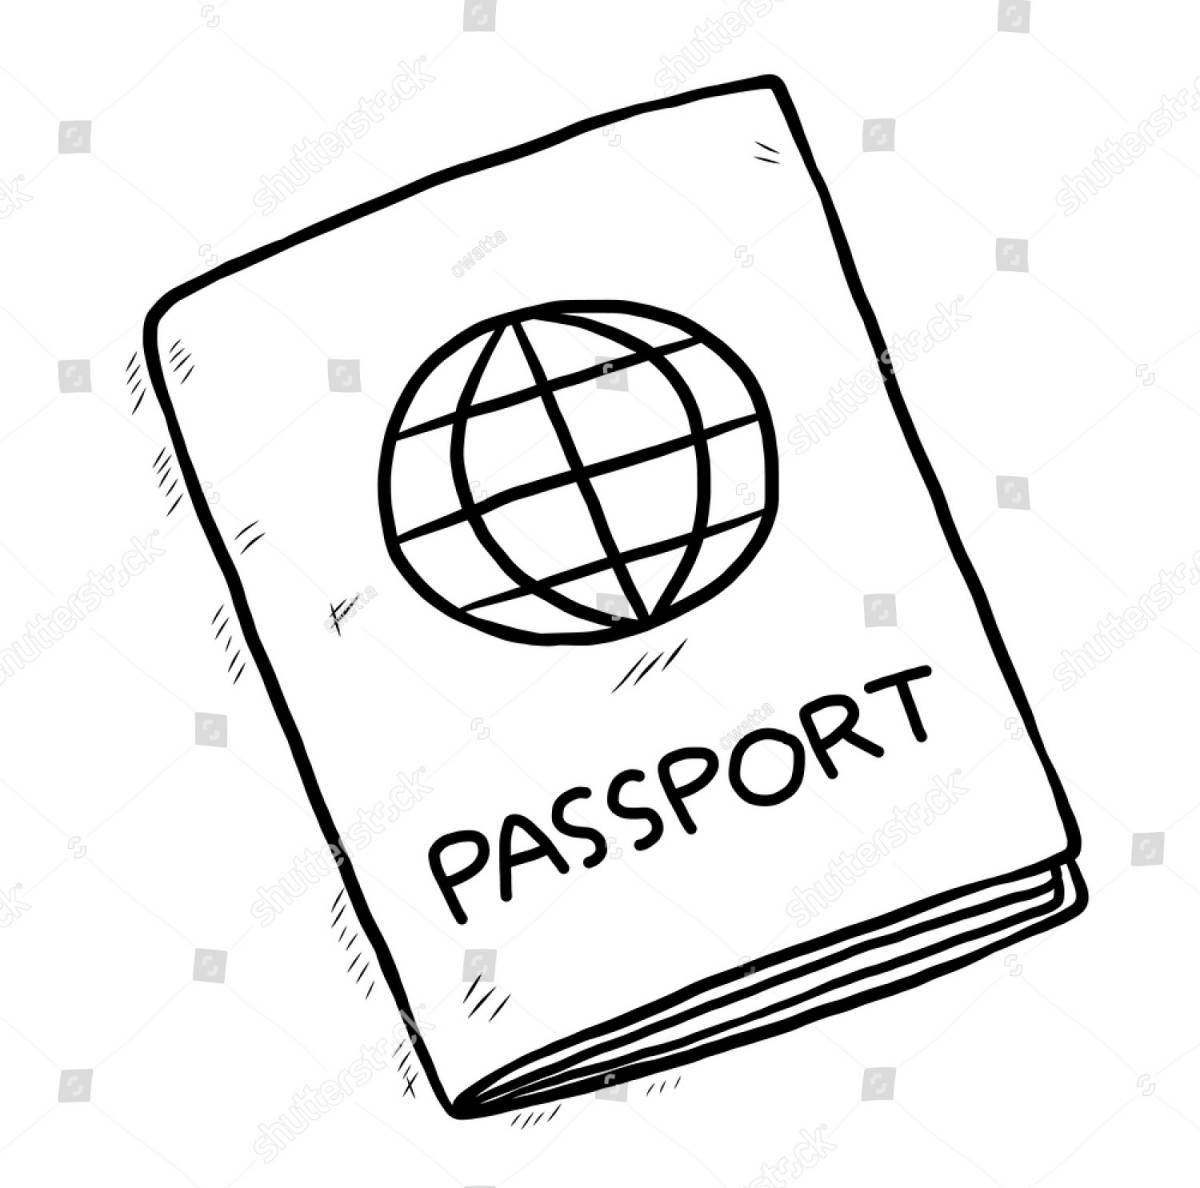 Exciting passport coloring